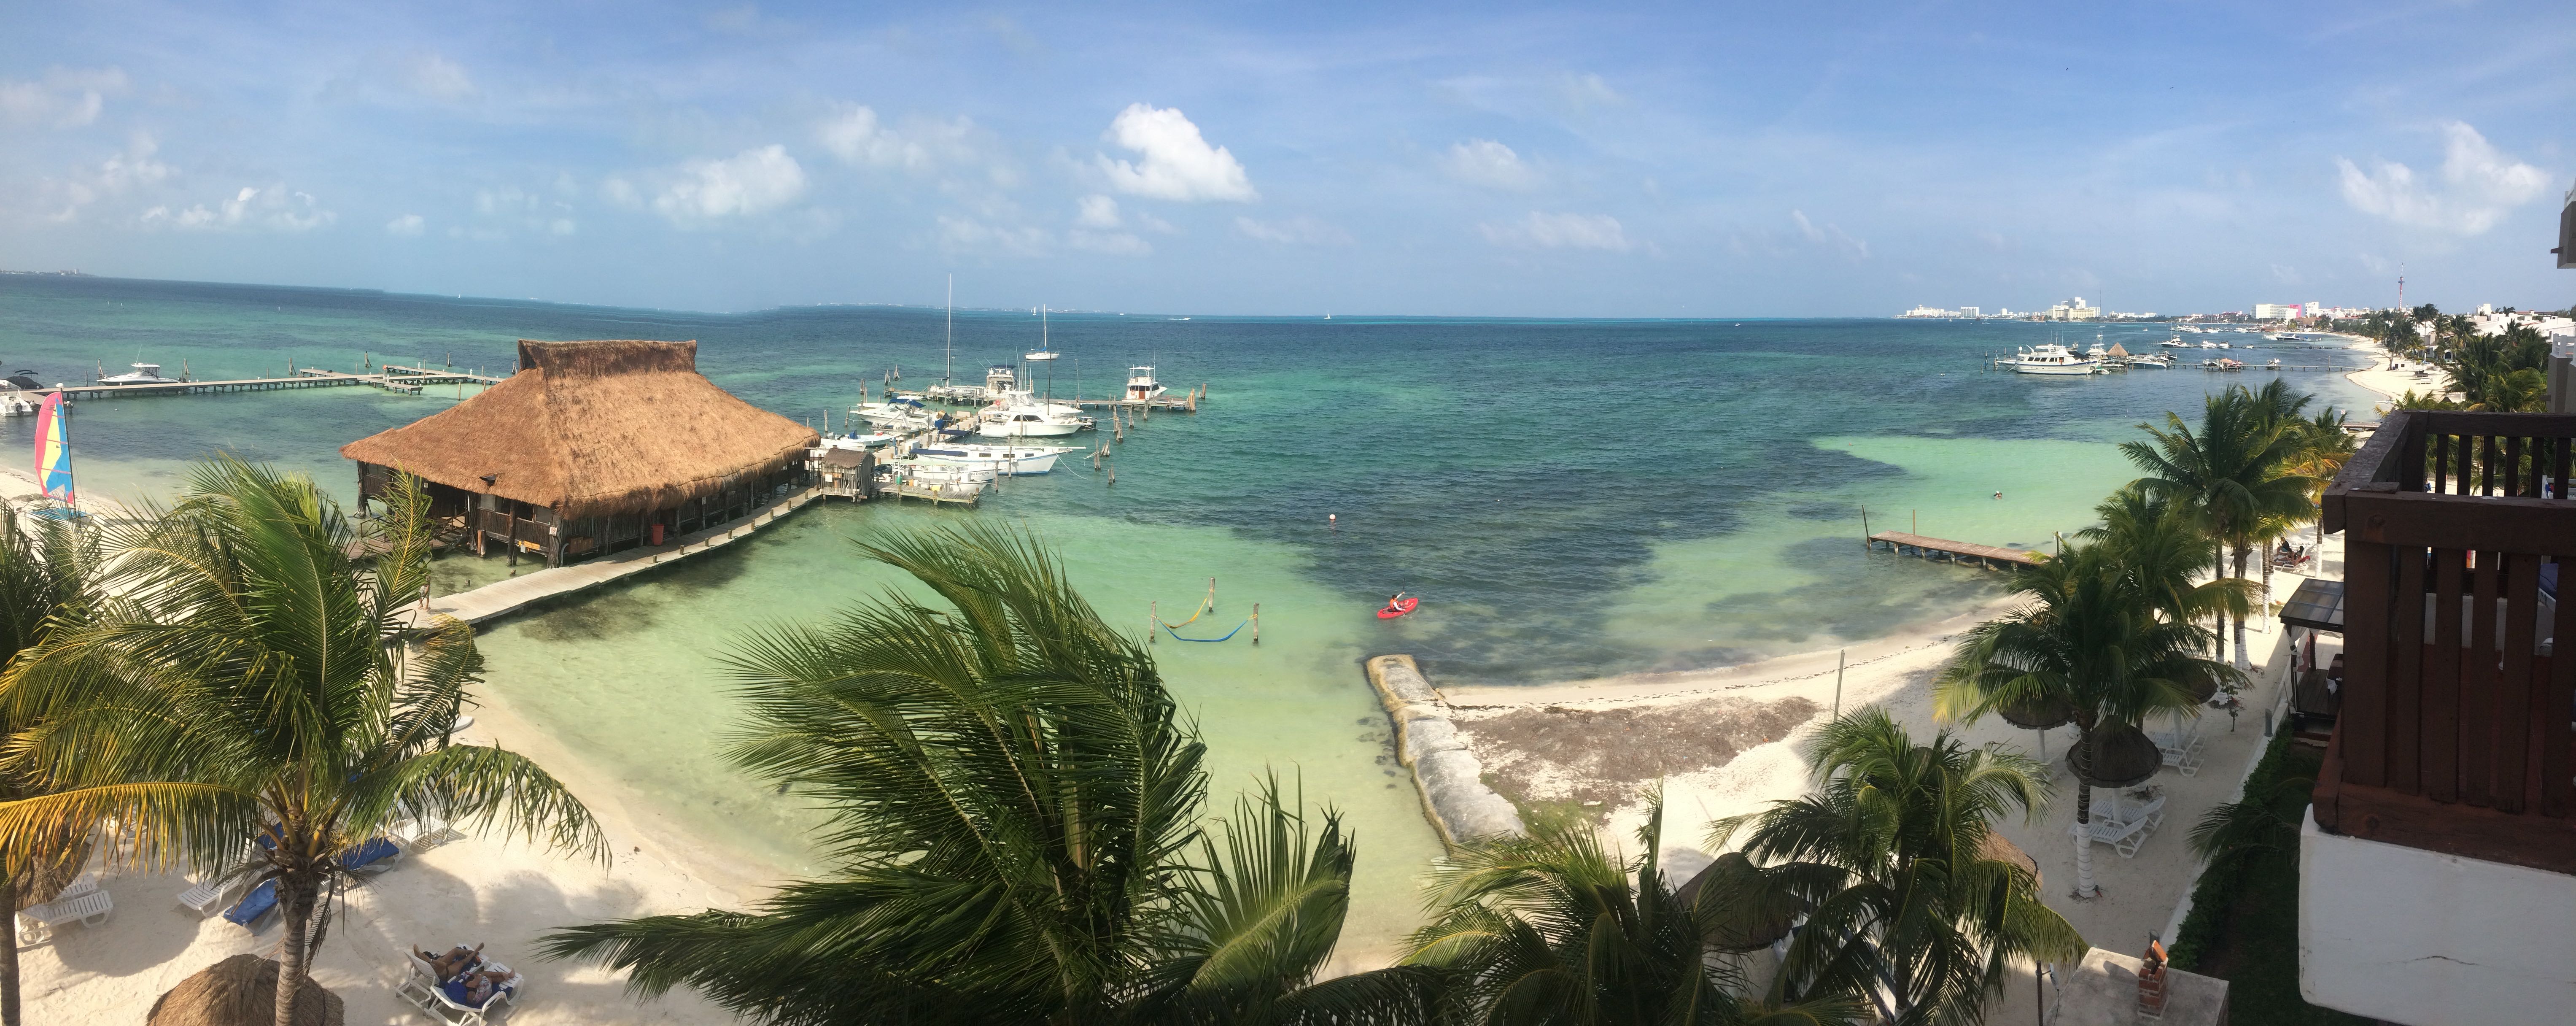 tours from cancun to belize